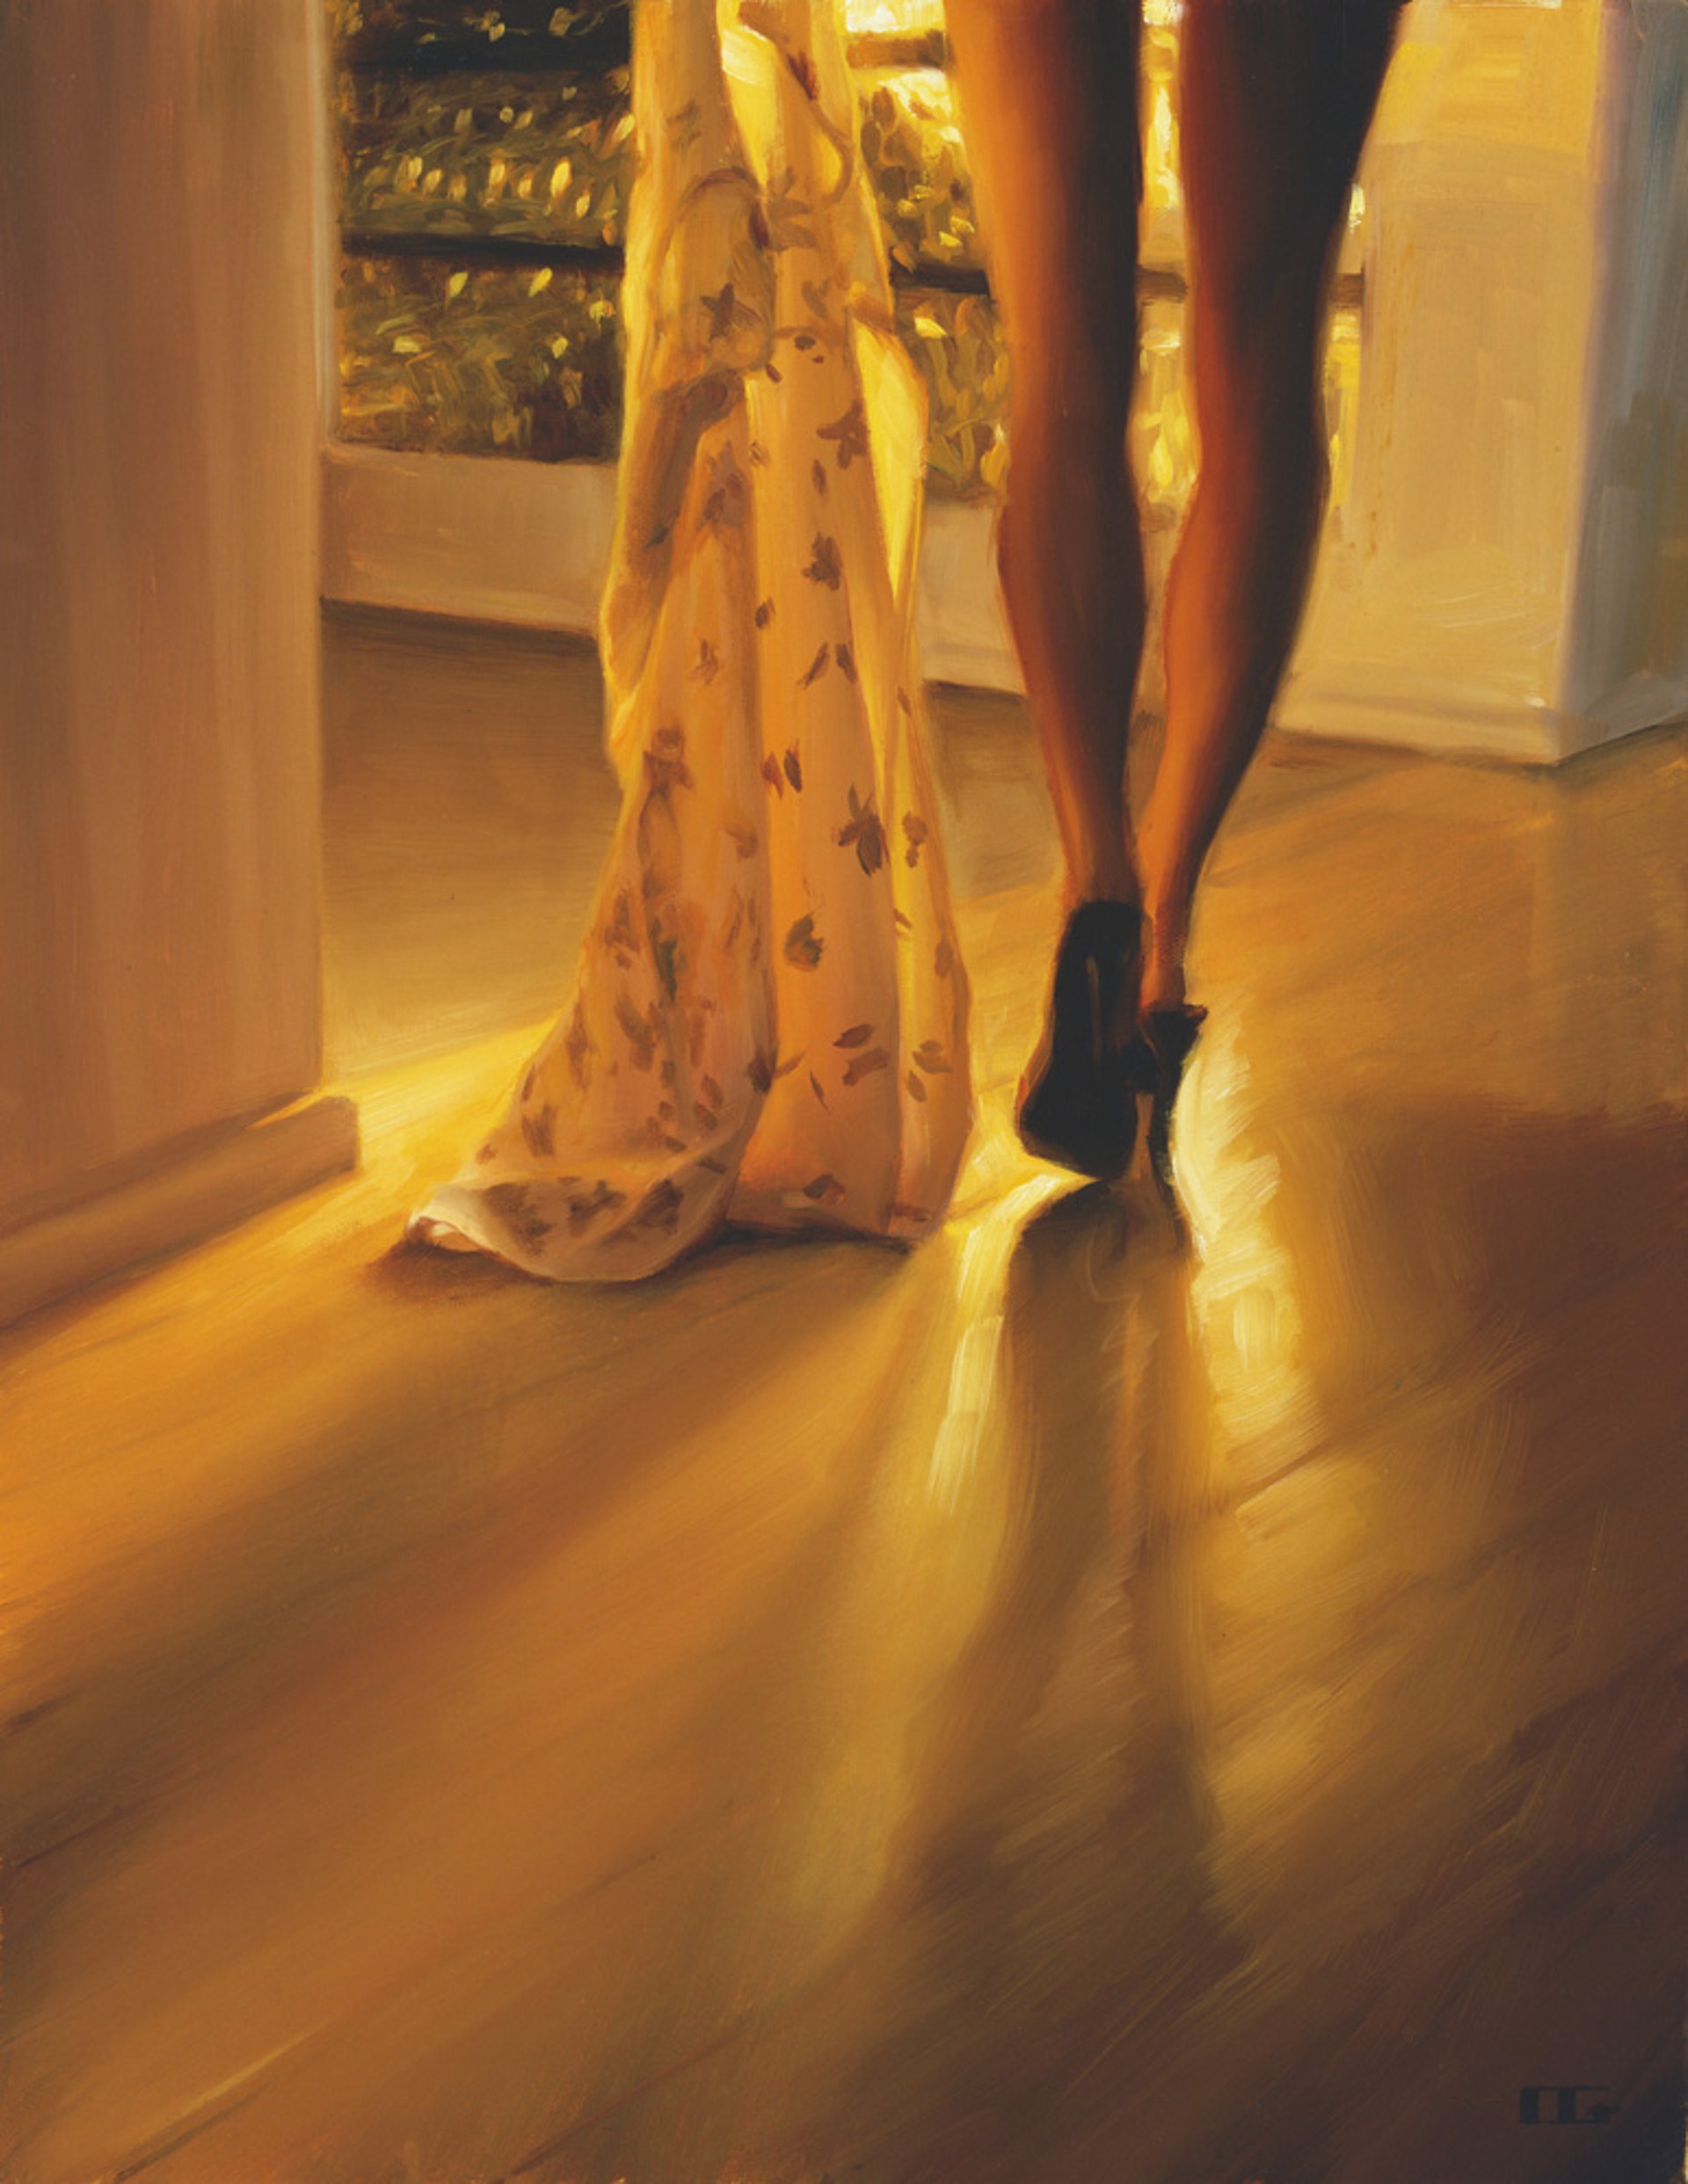 Sundress In The Sun by Carrie Graber